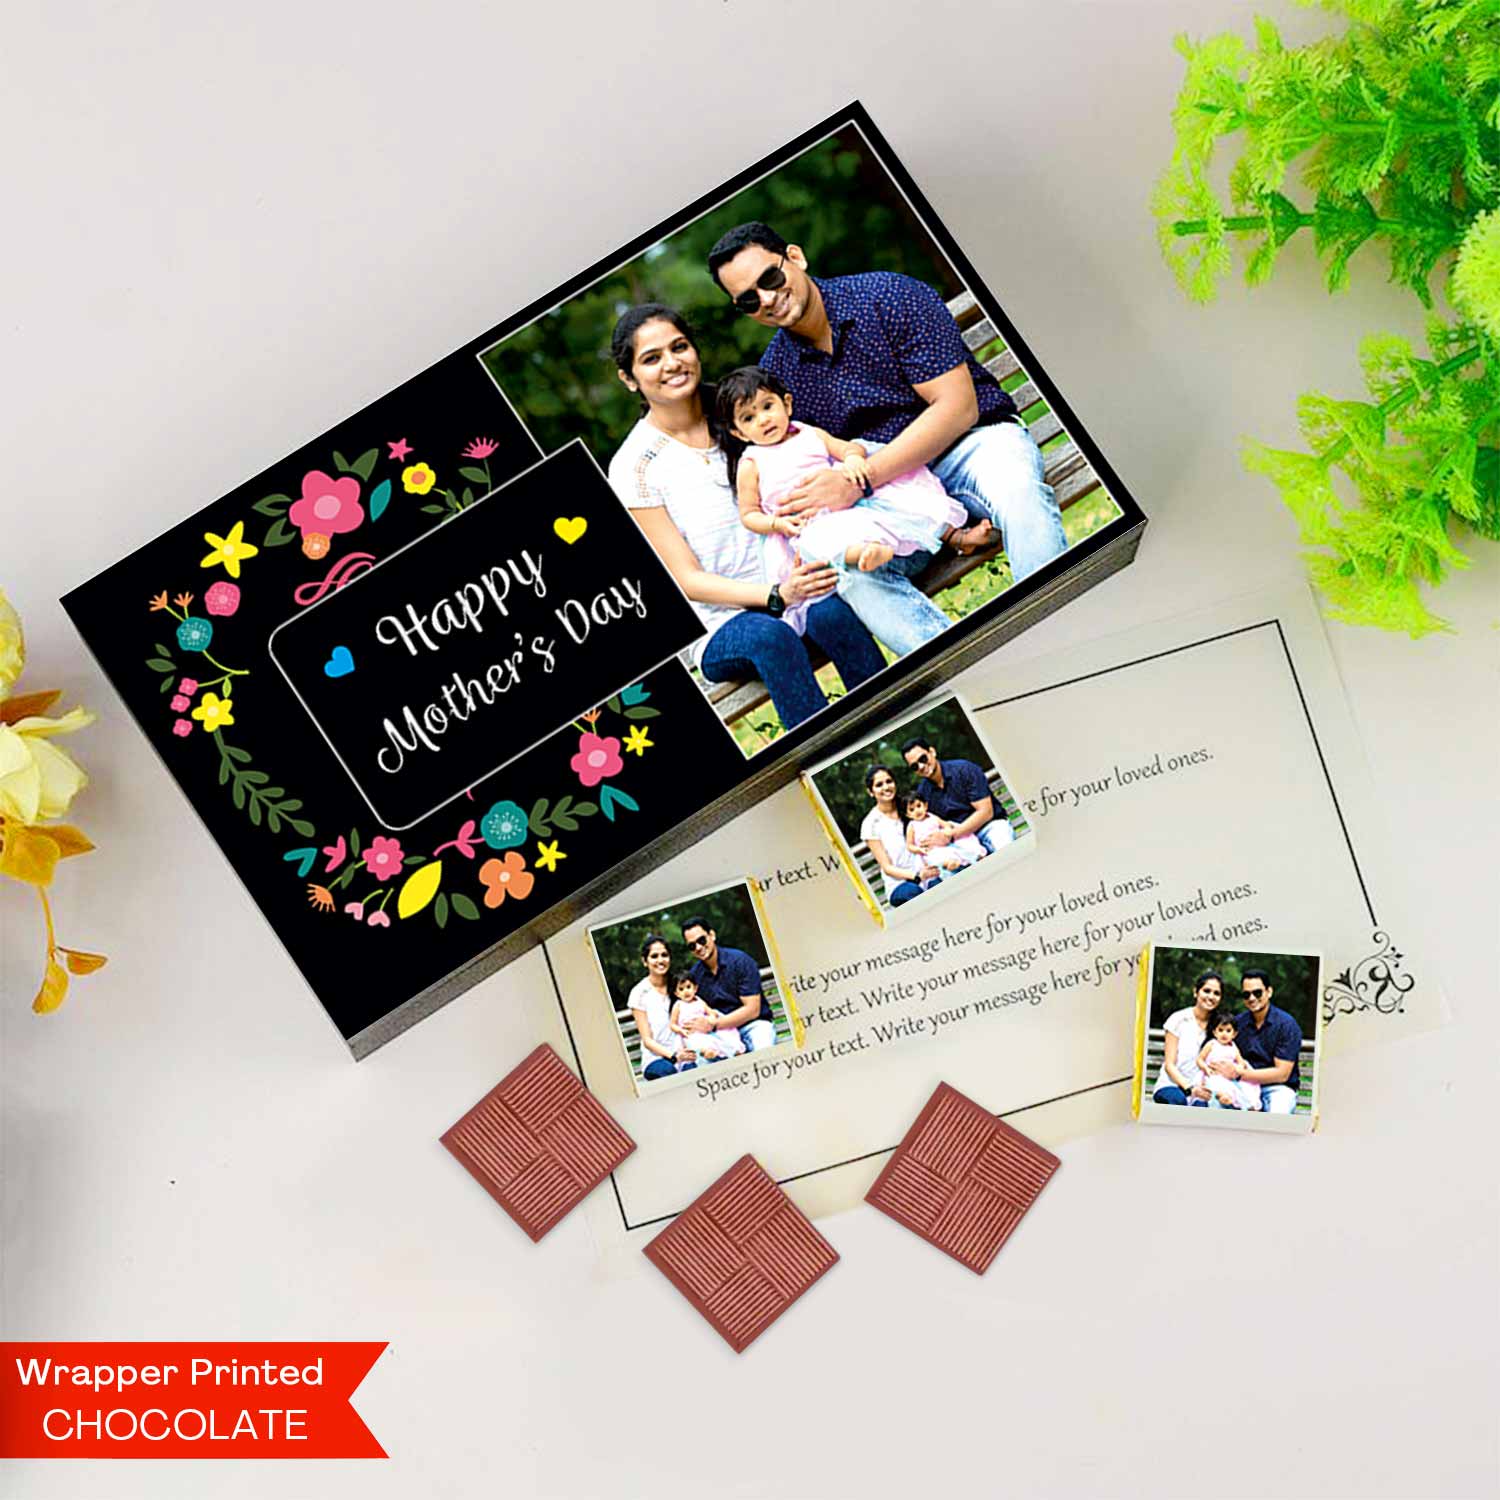 Customised Chocolates with Happy Mother's Day Printed wrappers